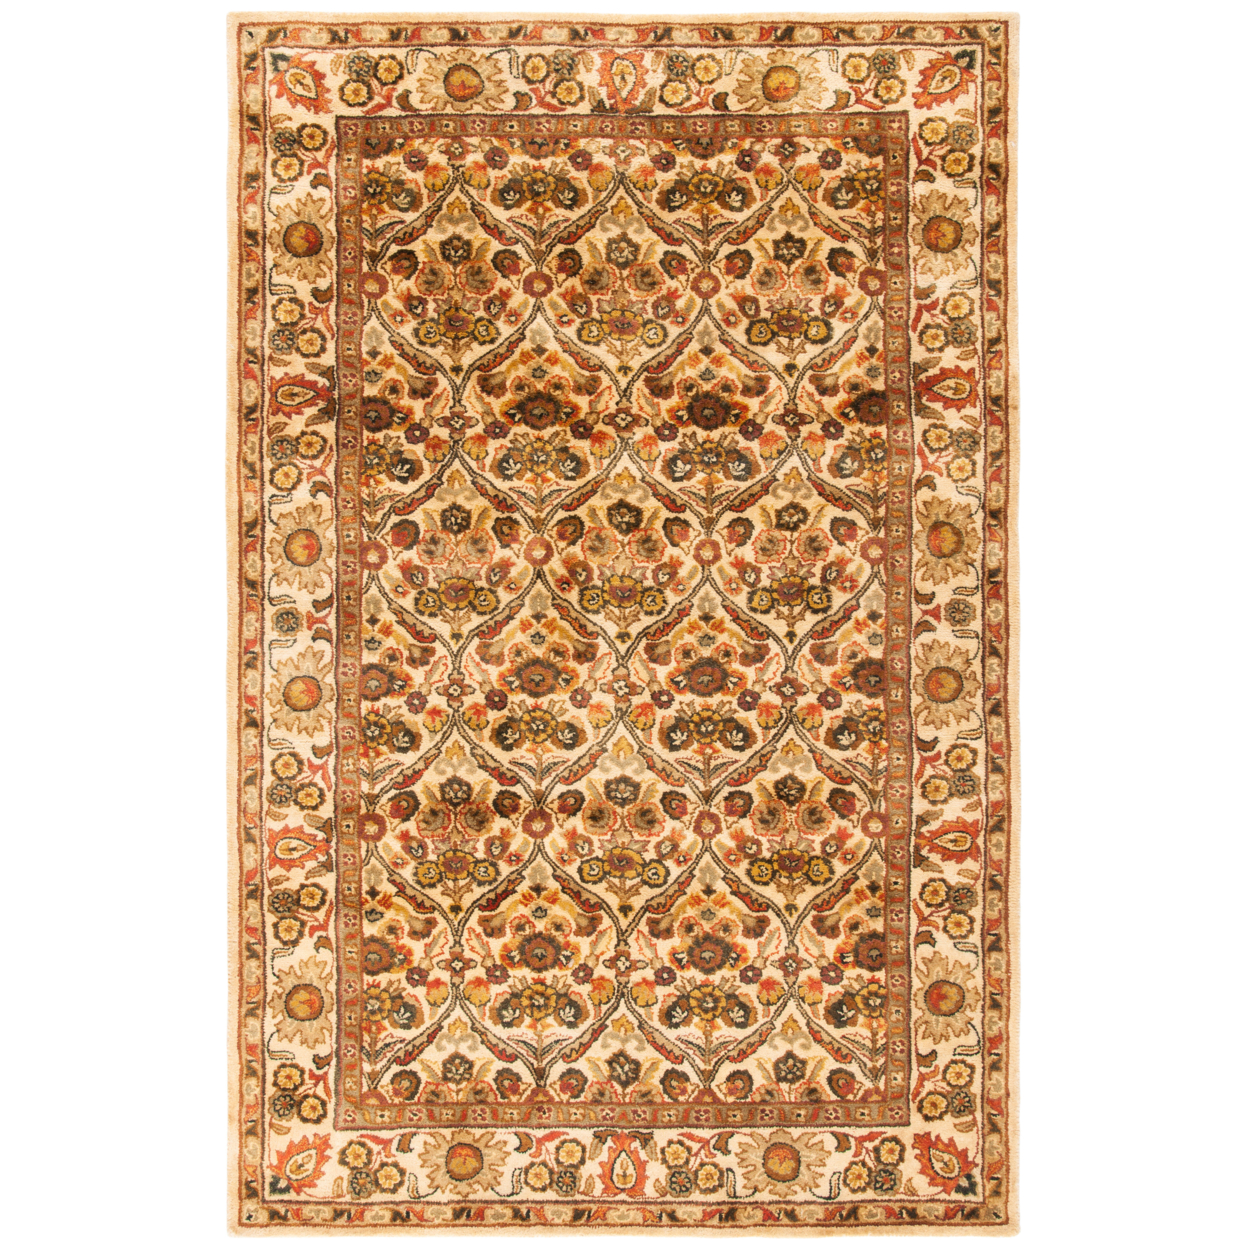 SAFAVIEH Antiquity Collection AT51C Handmade Gold Rug - 4' 6 X 6' 6 Oval